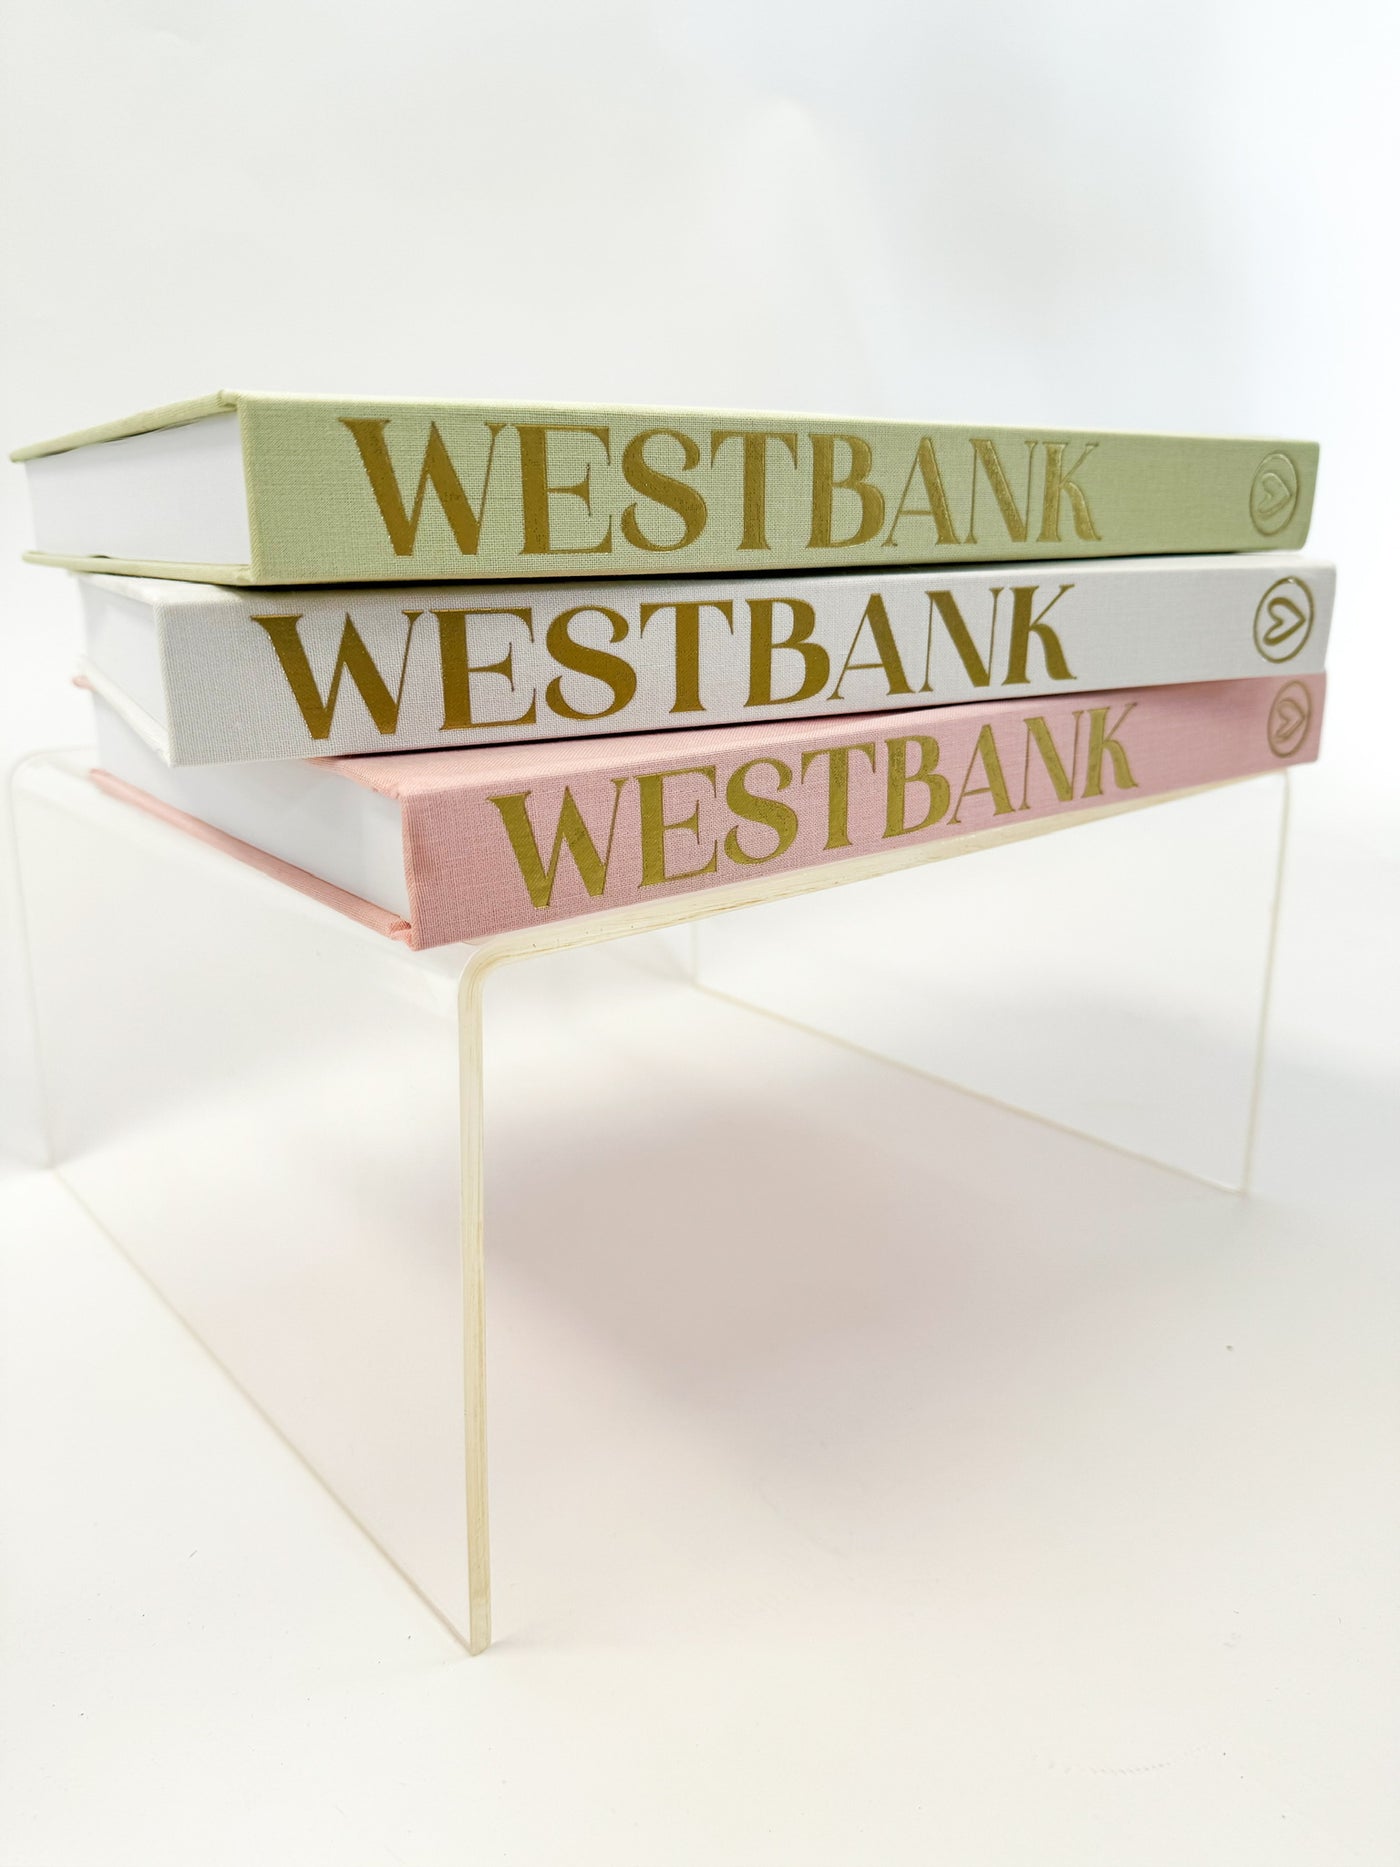 Westbank Coffee Table Book